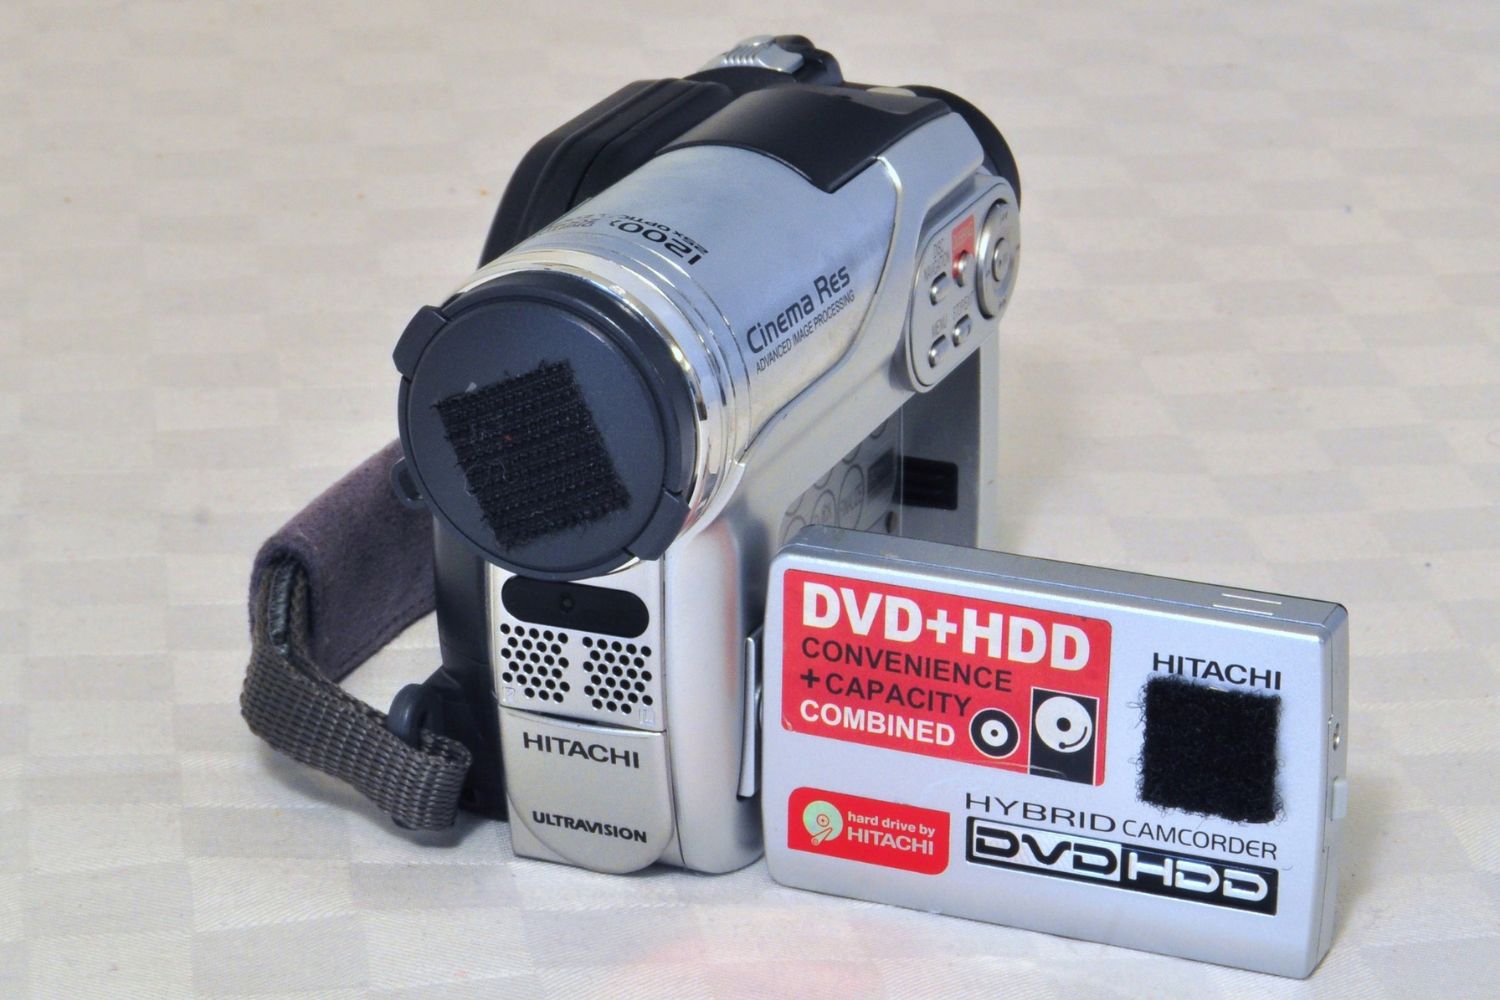 How To Unfinalize A DVD On A Hitachi Camcorder